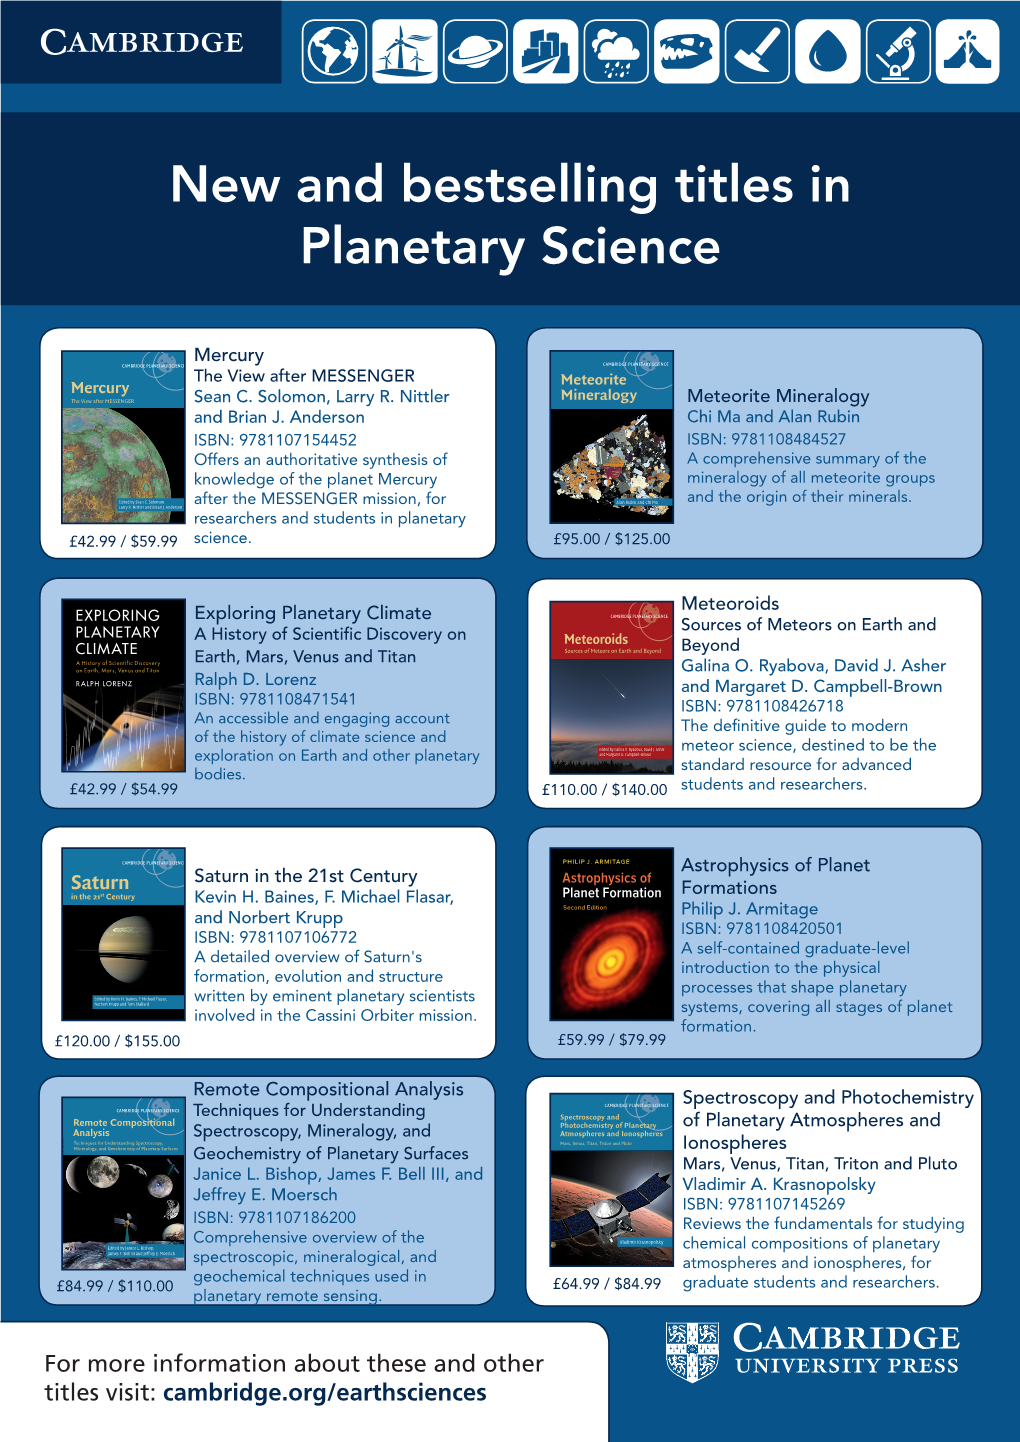 New and Bestselling Titles in Planetary Science